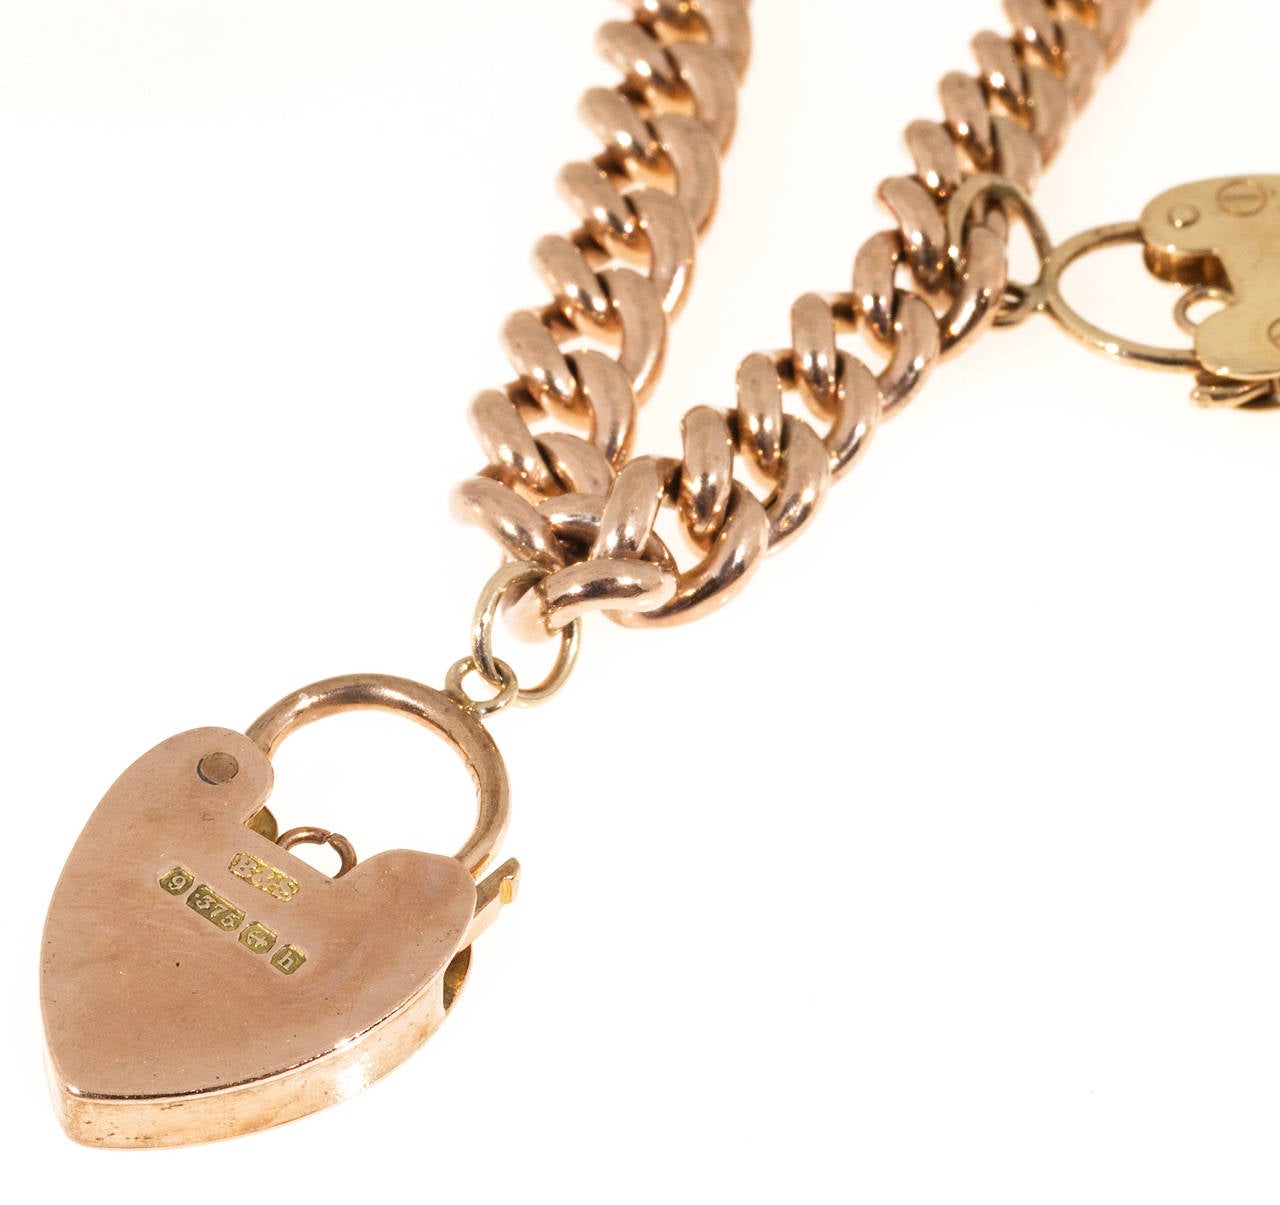 English 9k gold hollow link bracelet with 5 heart lock Charms. Mechanical Circa 1900-1920.

5 heart lock charms all still open including the catch .7 to 1 inch top to bottom
9k Gold
34.3 grams
Chain: 6.5mm wide
Chain stamped: 375
Each lock